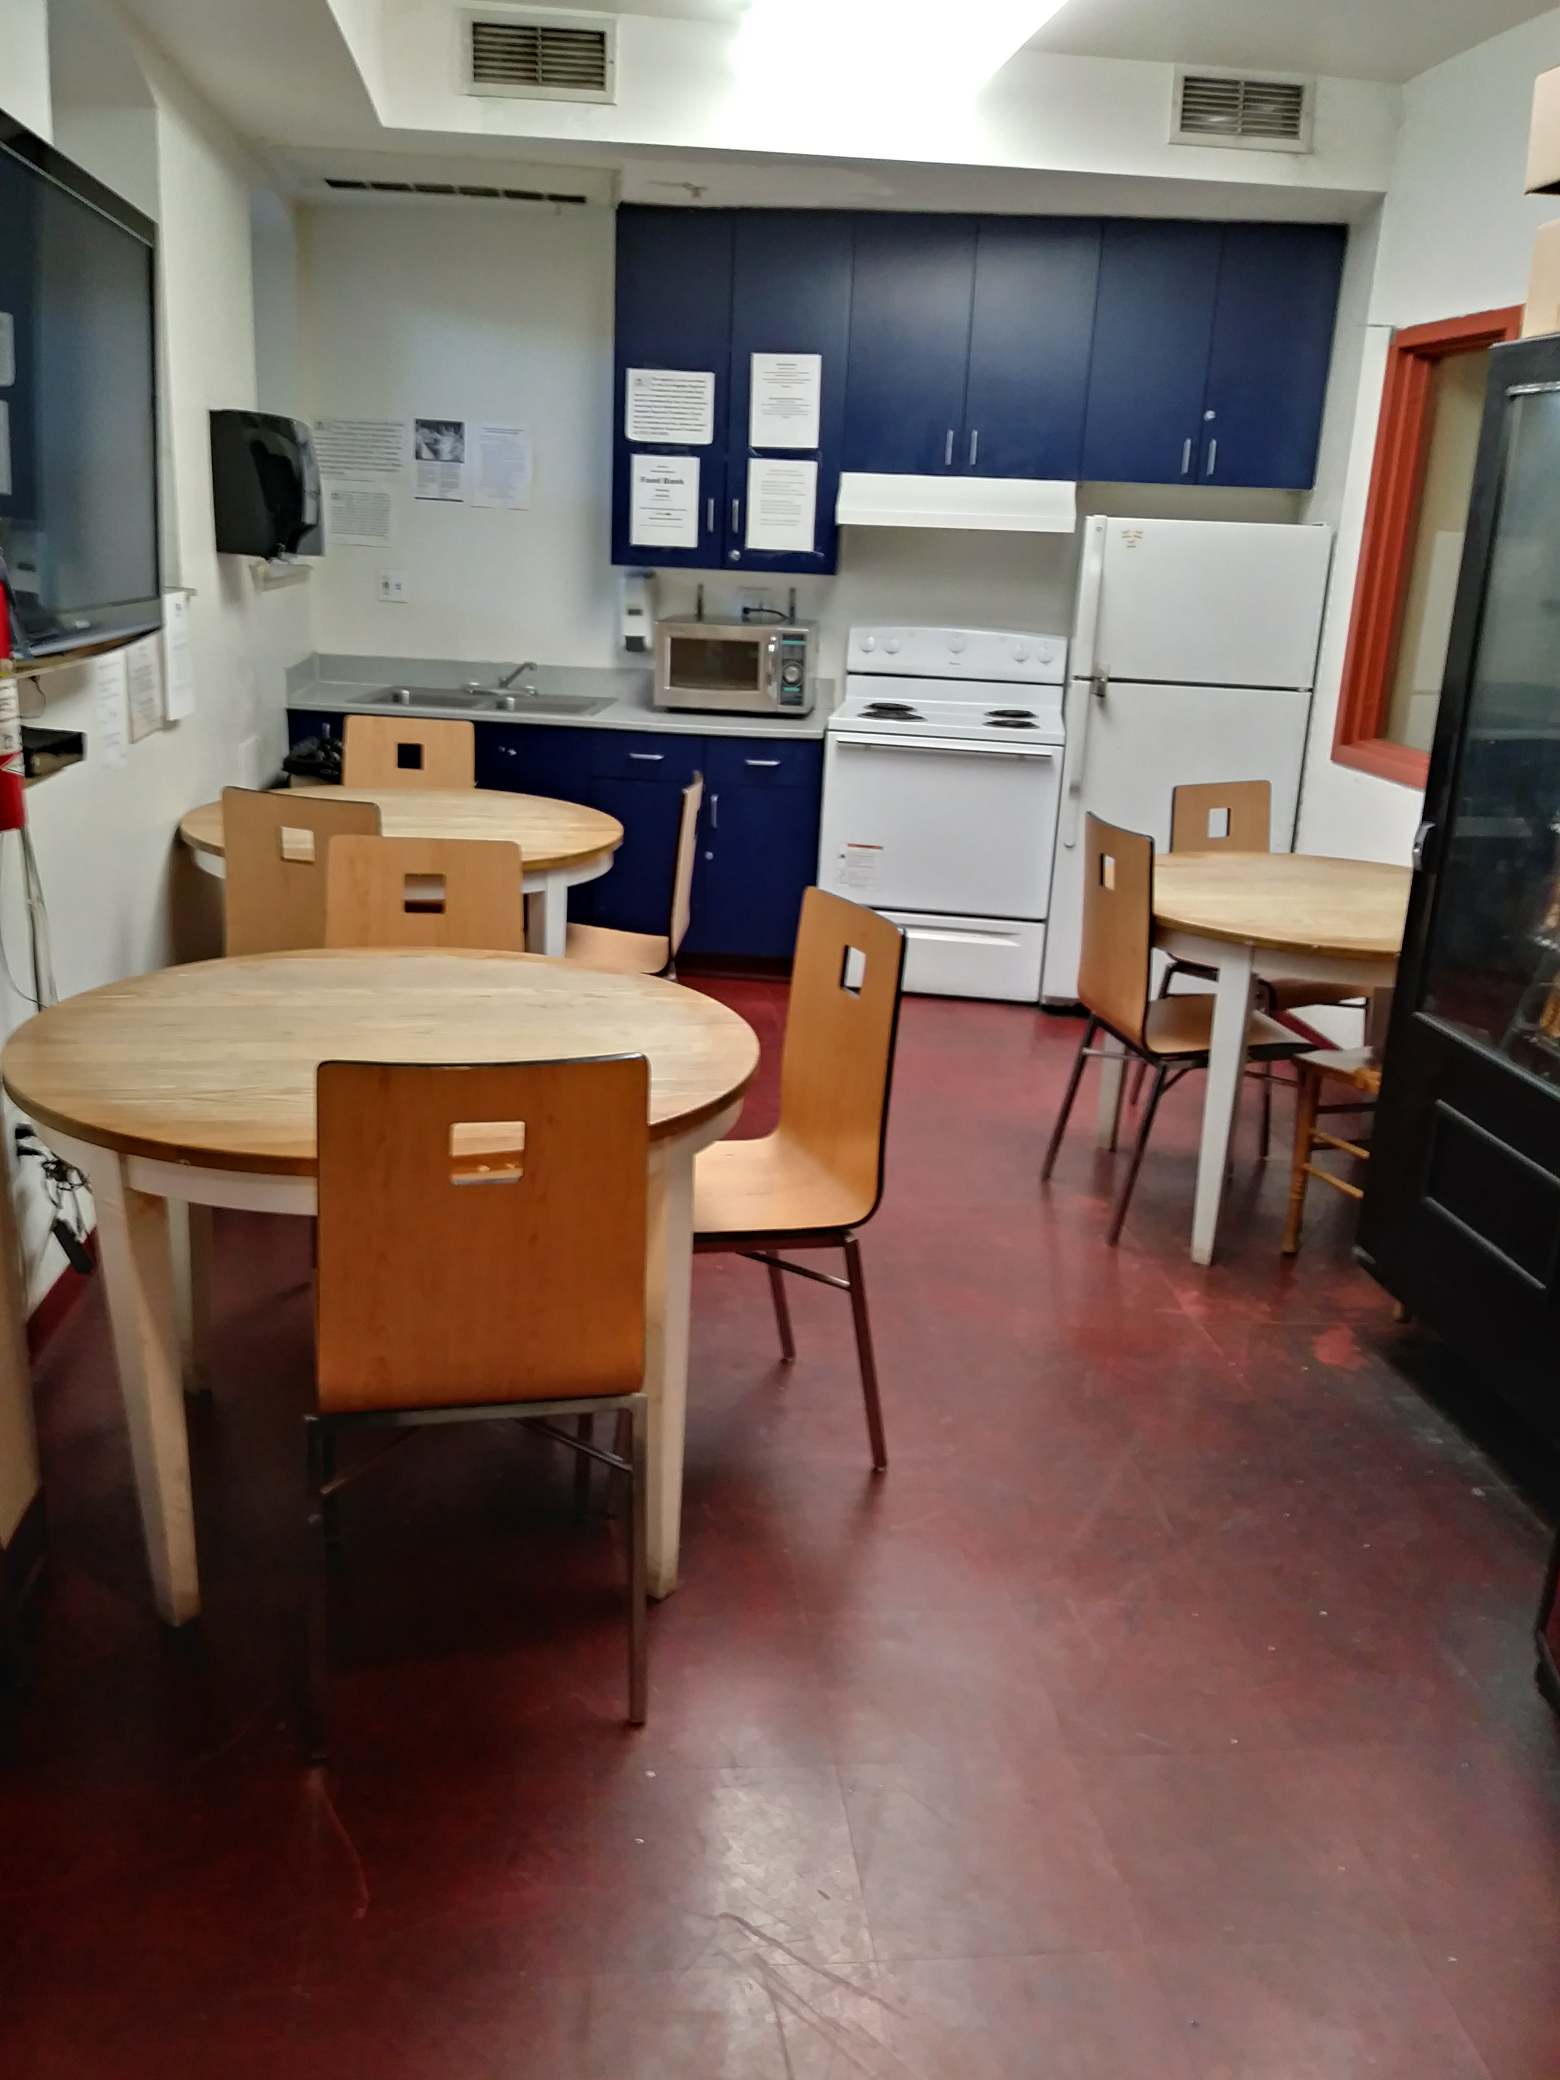 Photo of Community Kitchen Area showing three round tables with chairs, kitchen cabinets, refrigerator, stove and oven, microwave and flat screen TV attached to the wall.